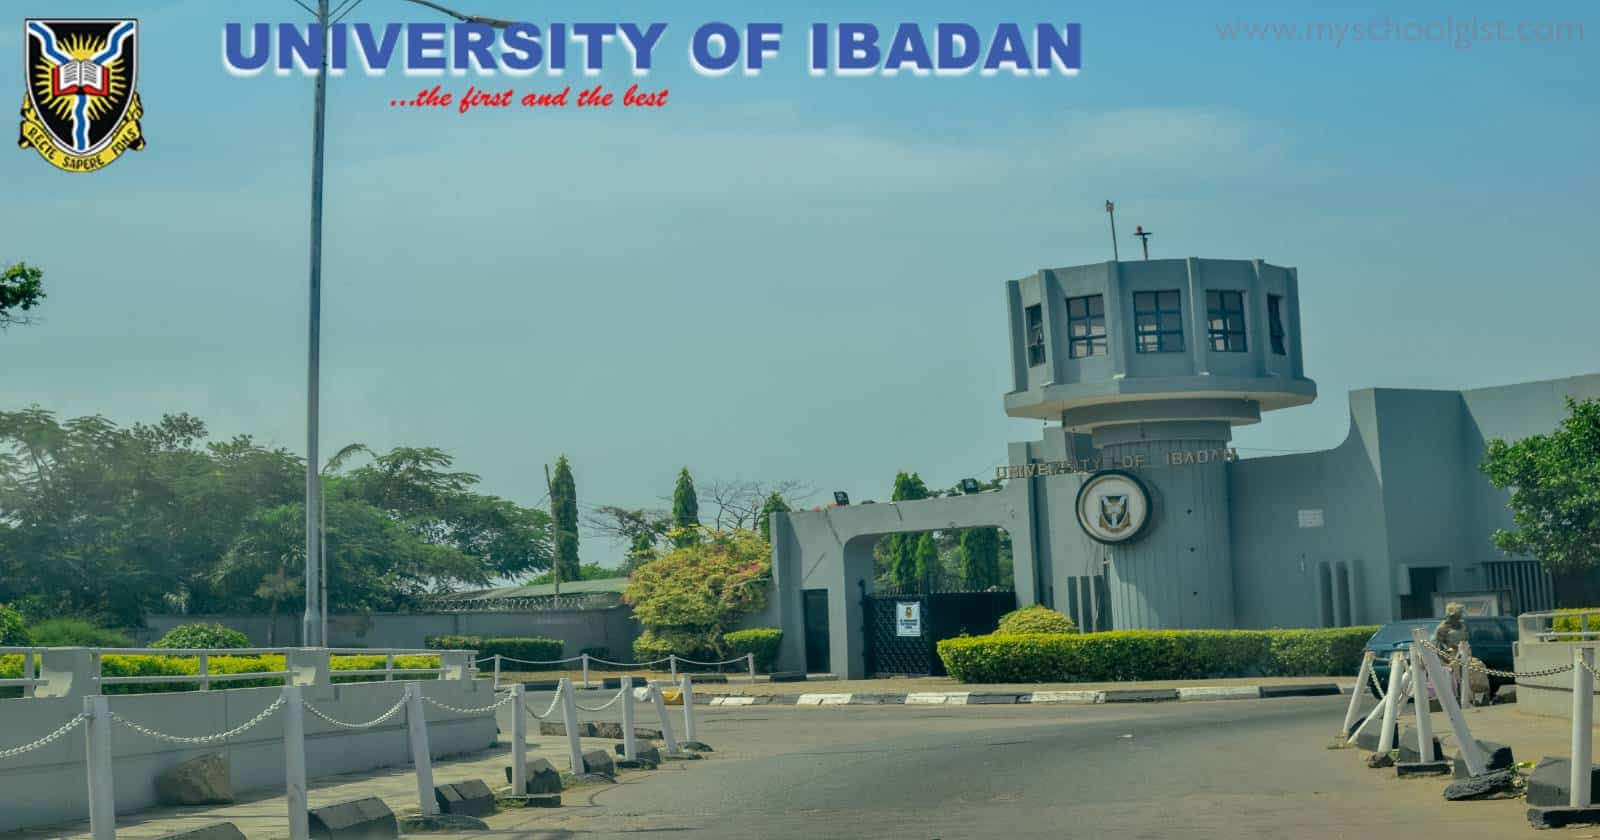 Registration for the University of Ibadan’s (UI) SIWES System